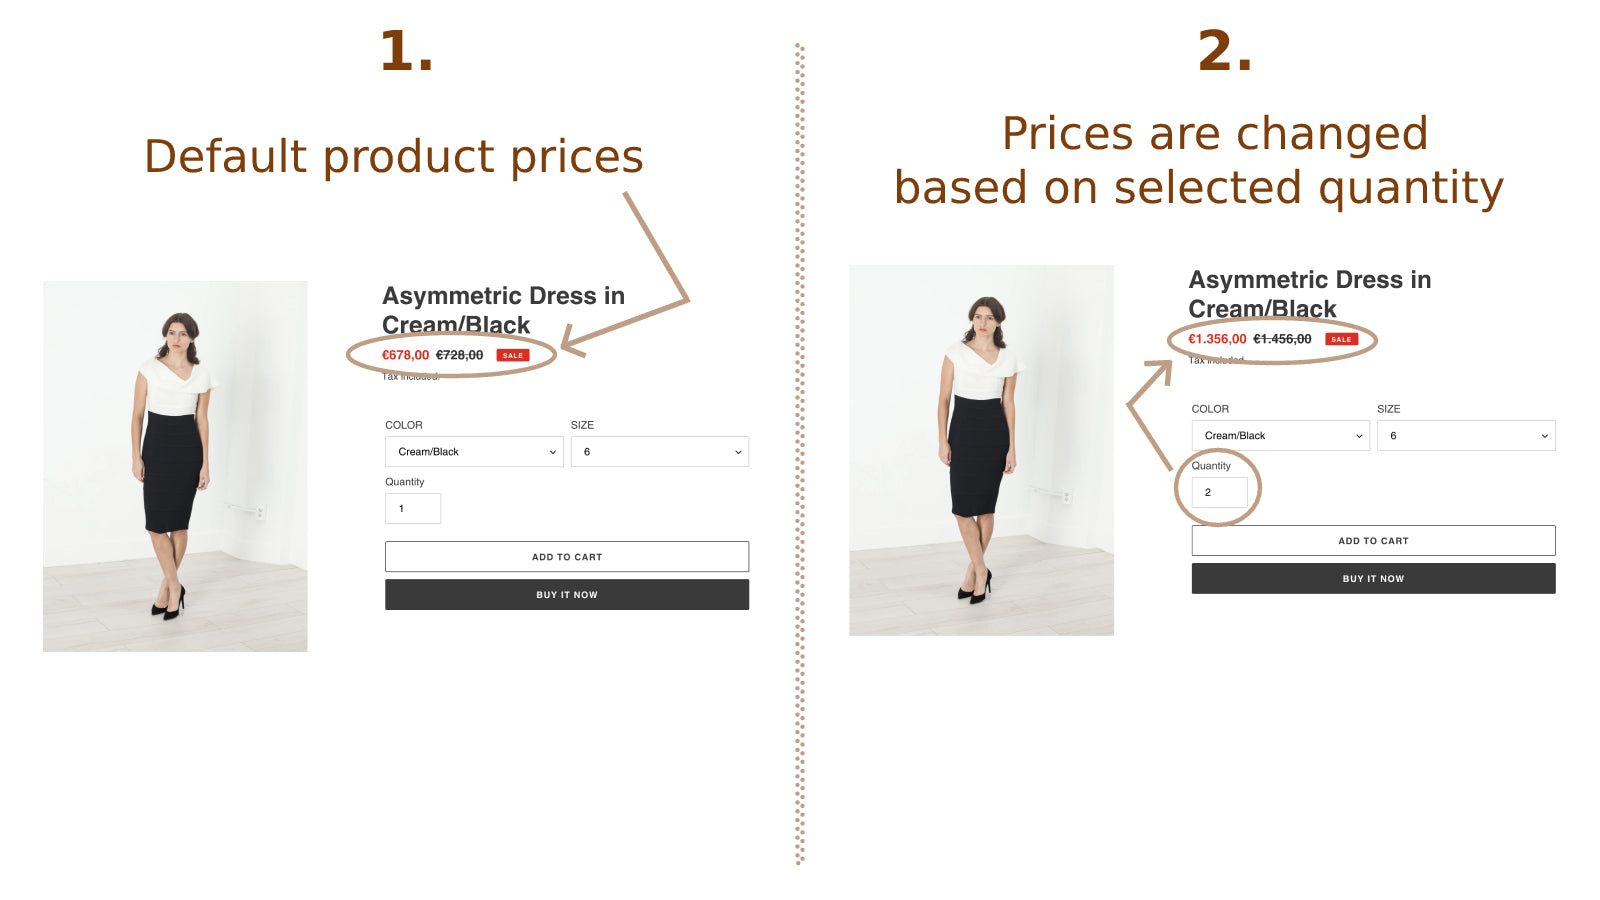 Prices are changed based on selected quantity in product detail